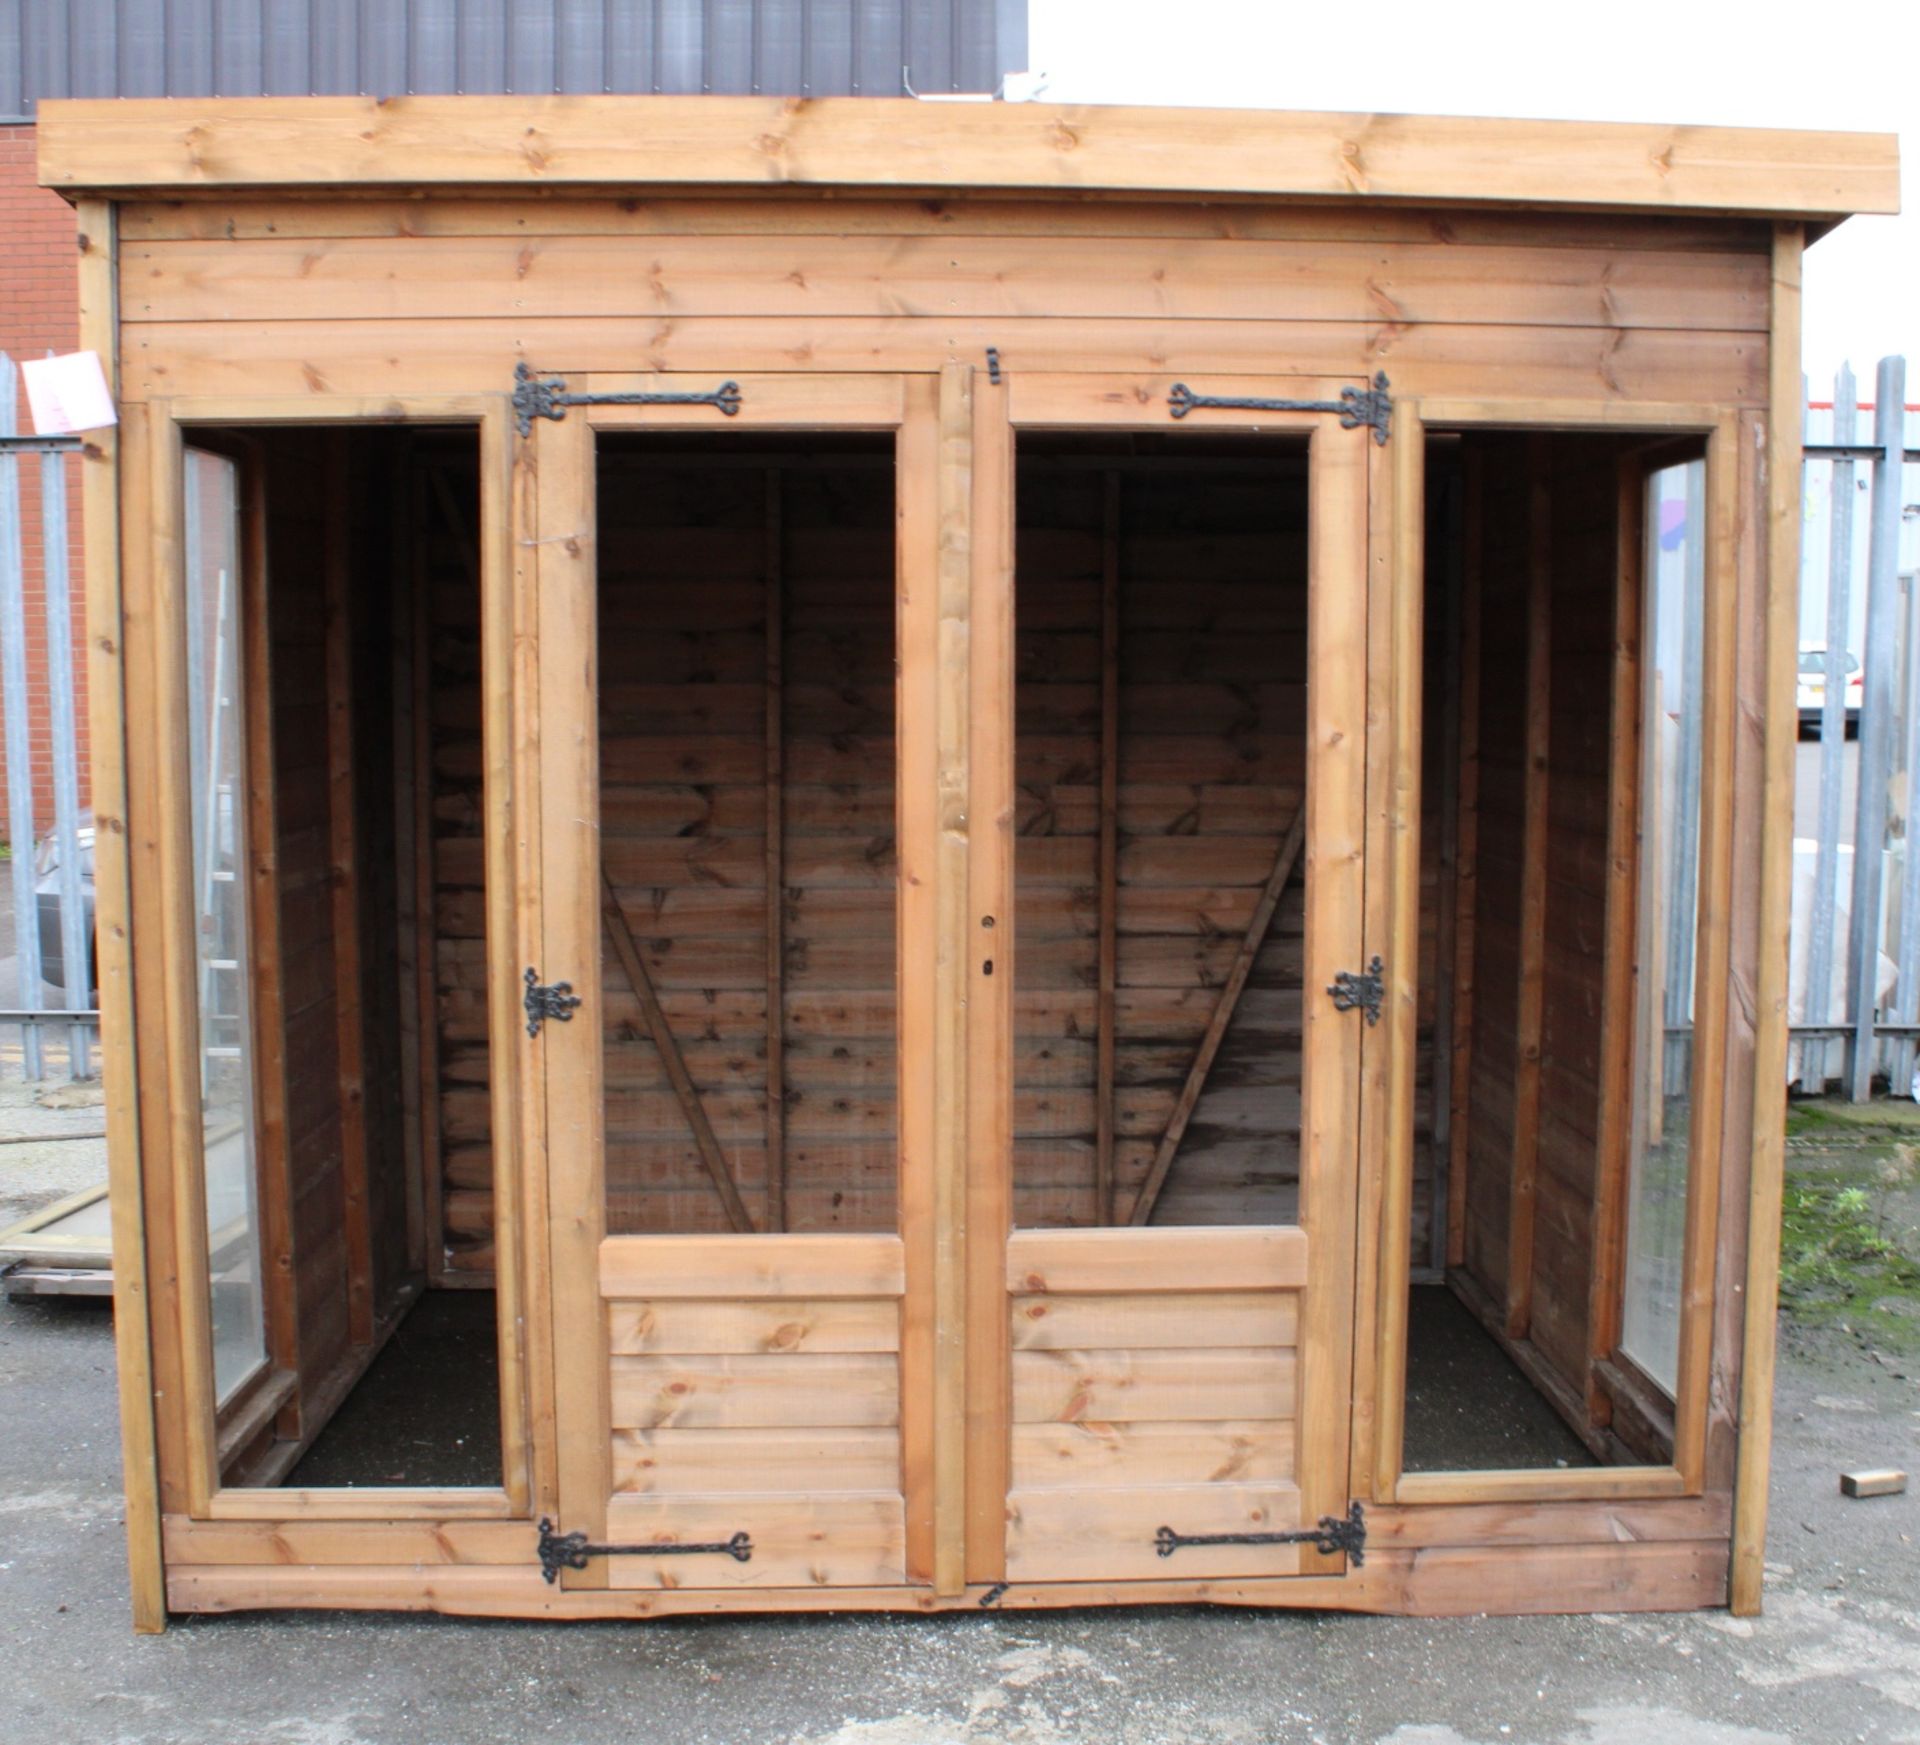 8x6 'clumber' summerhouse timber shed building, Standard 16mm Nominal Cladding RRP£ 2,640